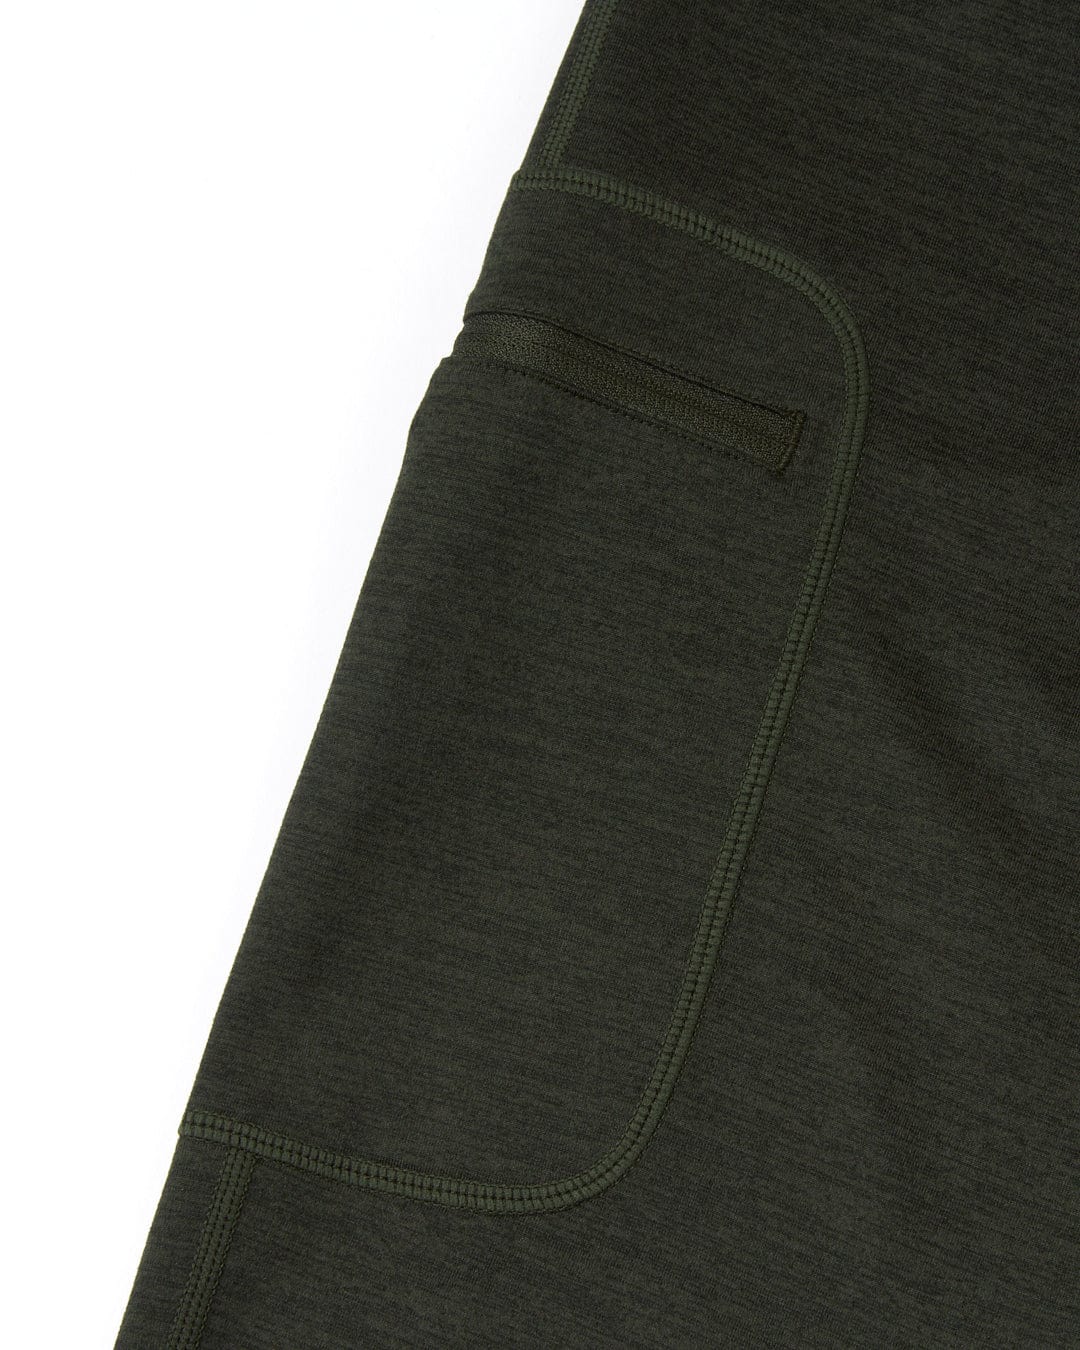 Close-up of Saltrock's Trek - Womens Active Leggings - Dark Green with a visible side thigh zipped pocket detail.